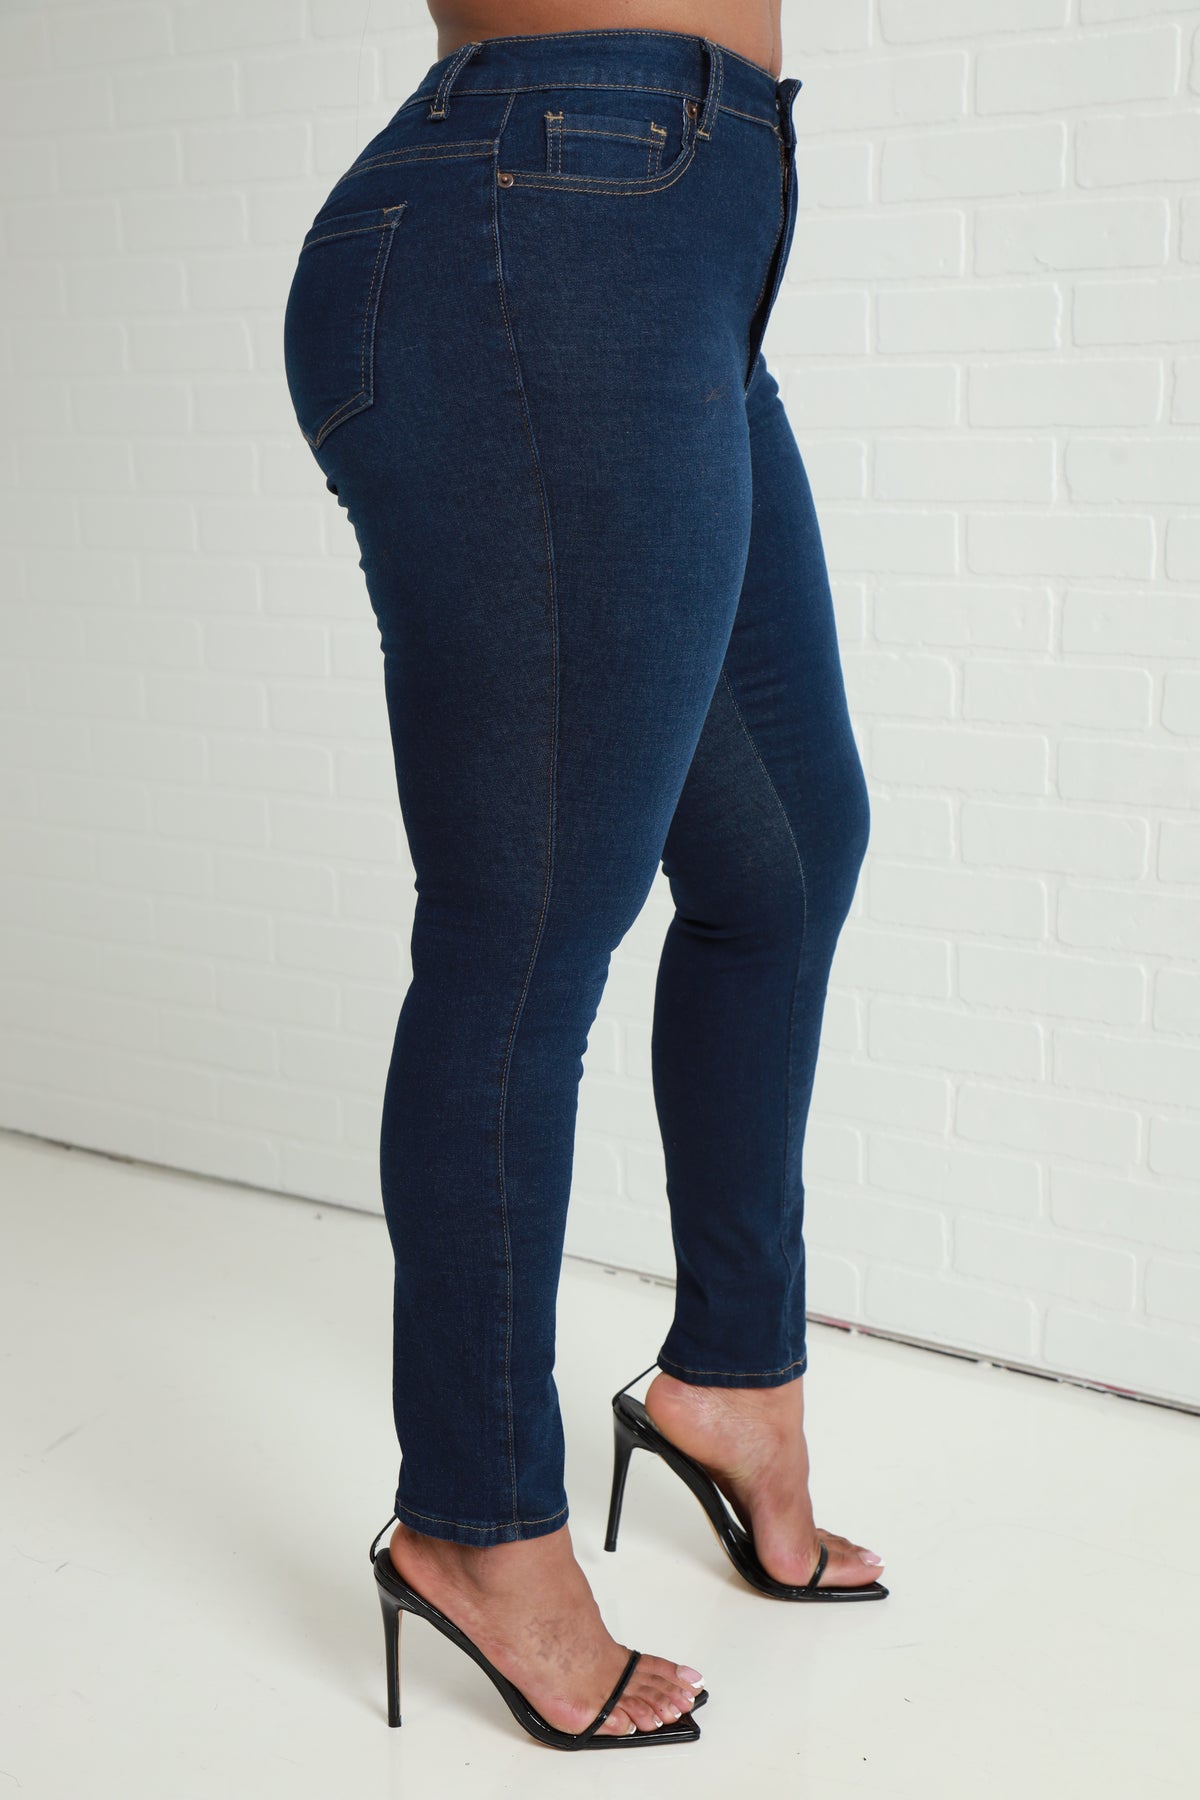 
              Been Awhile Hourglass High Rise Stretchy Jeans - Dark Wash - Swank A Posh
            